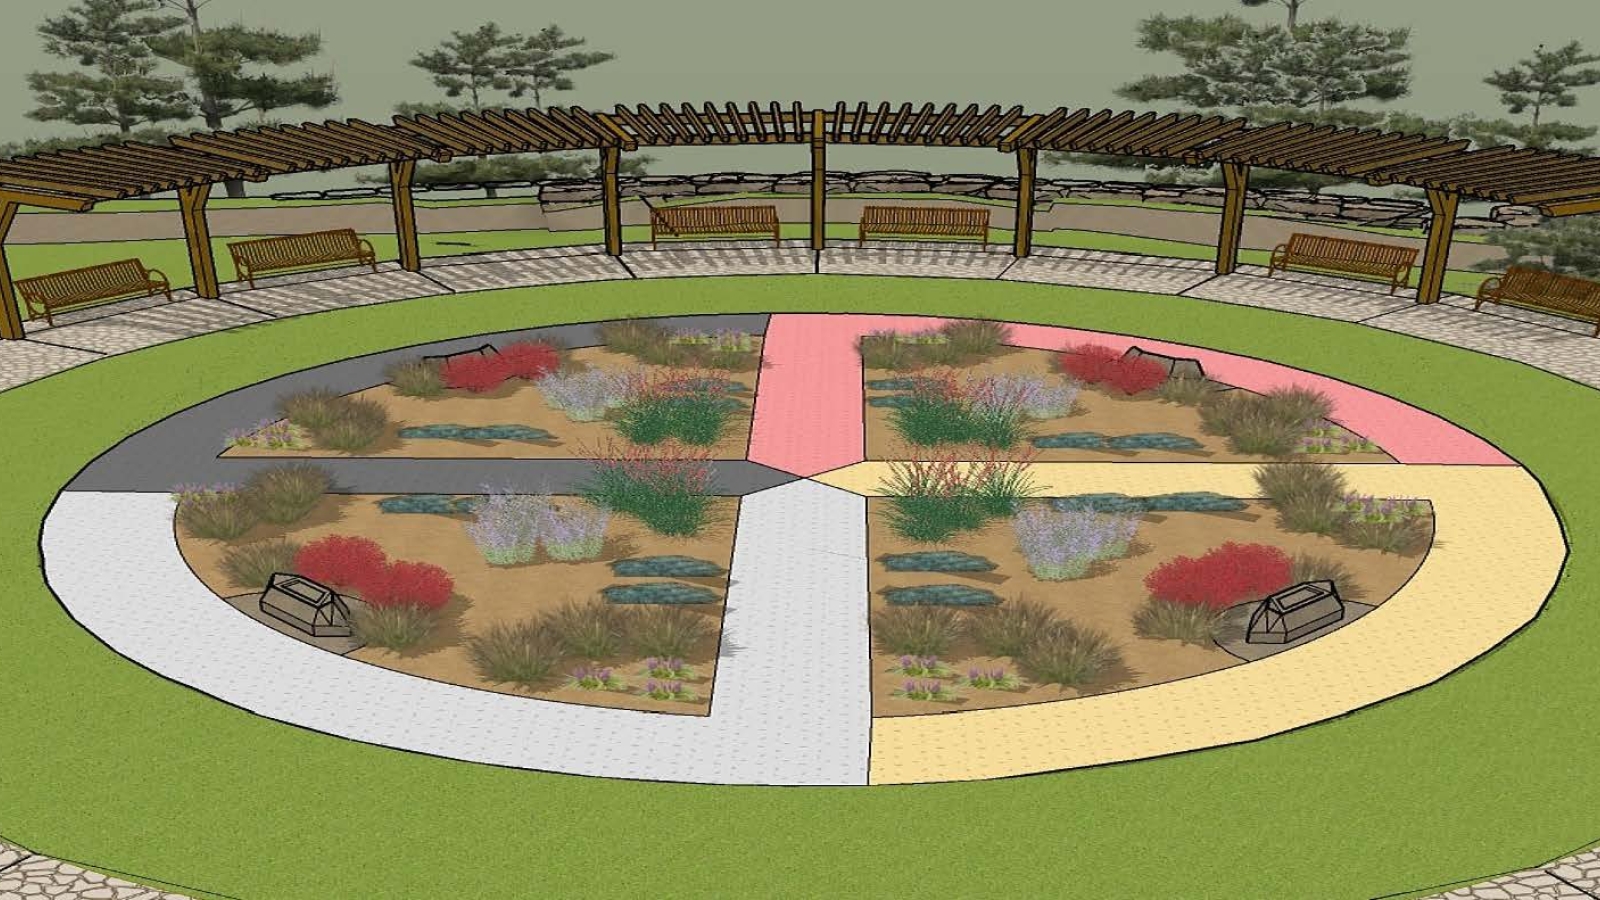 Designer rendition of the garden. A colored medicine wheel with plants at the center.